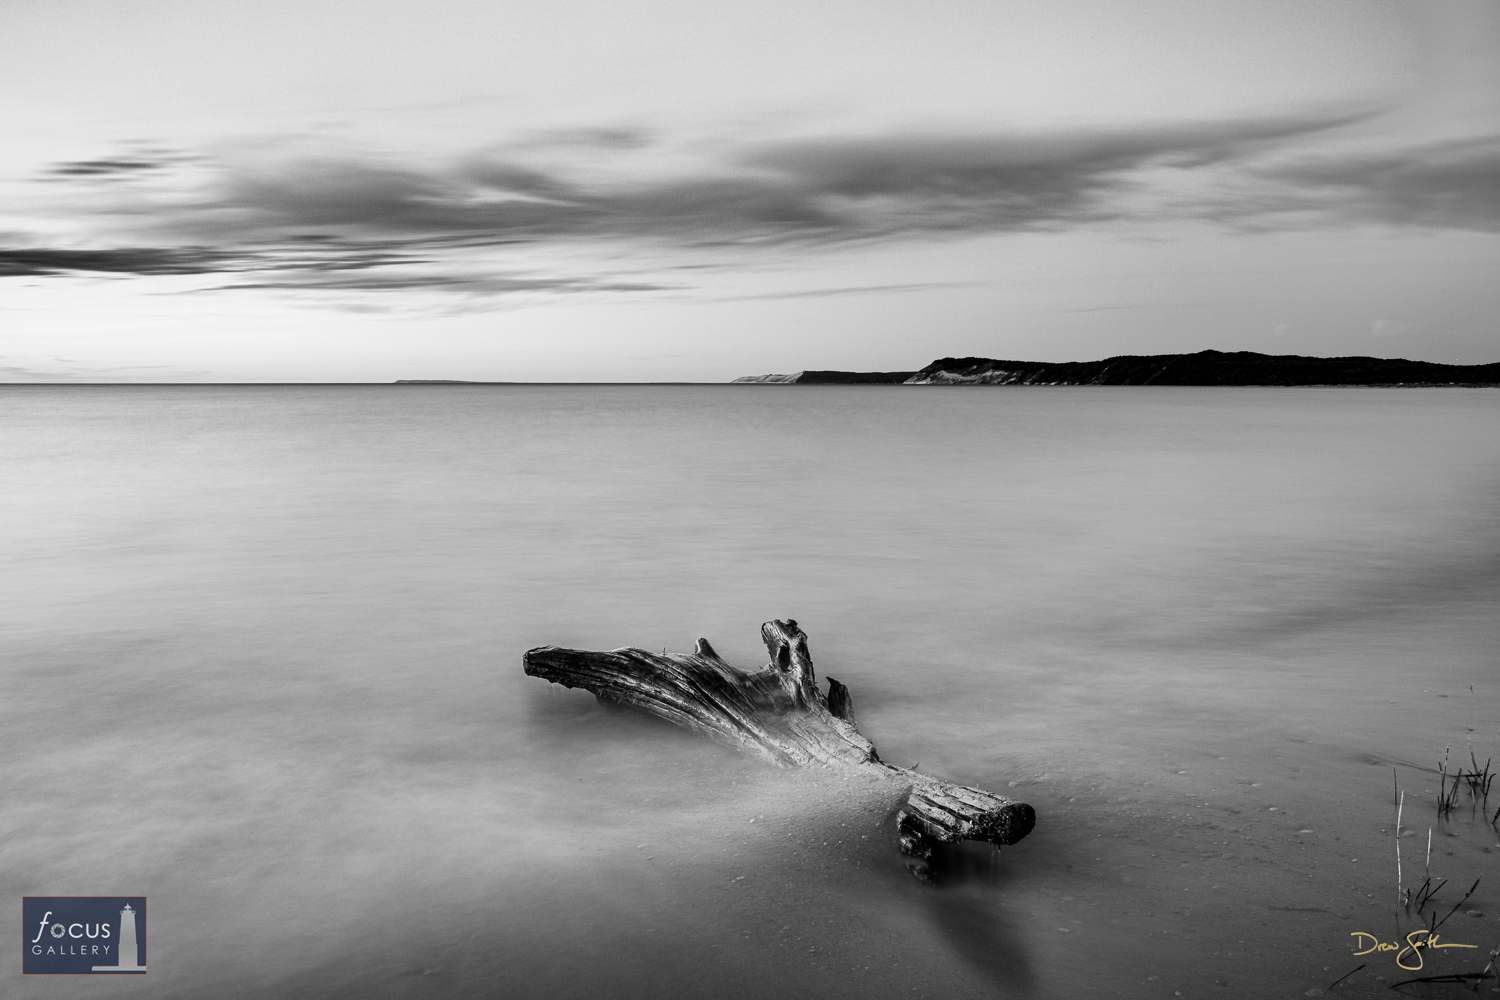 Photo © Drew Smith A driftwood log lays partially buried in the sand along Lake Michigan at Platte River Point. I used a long...